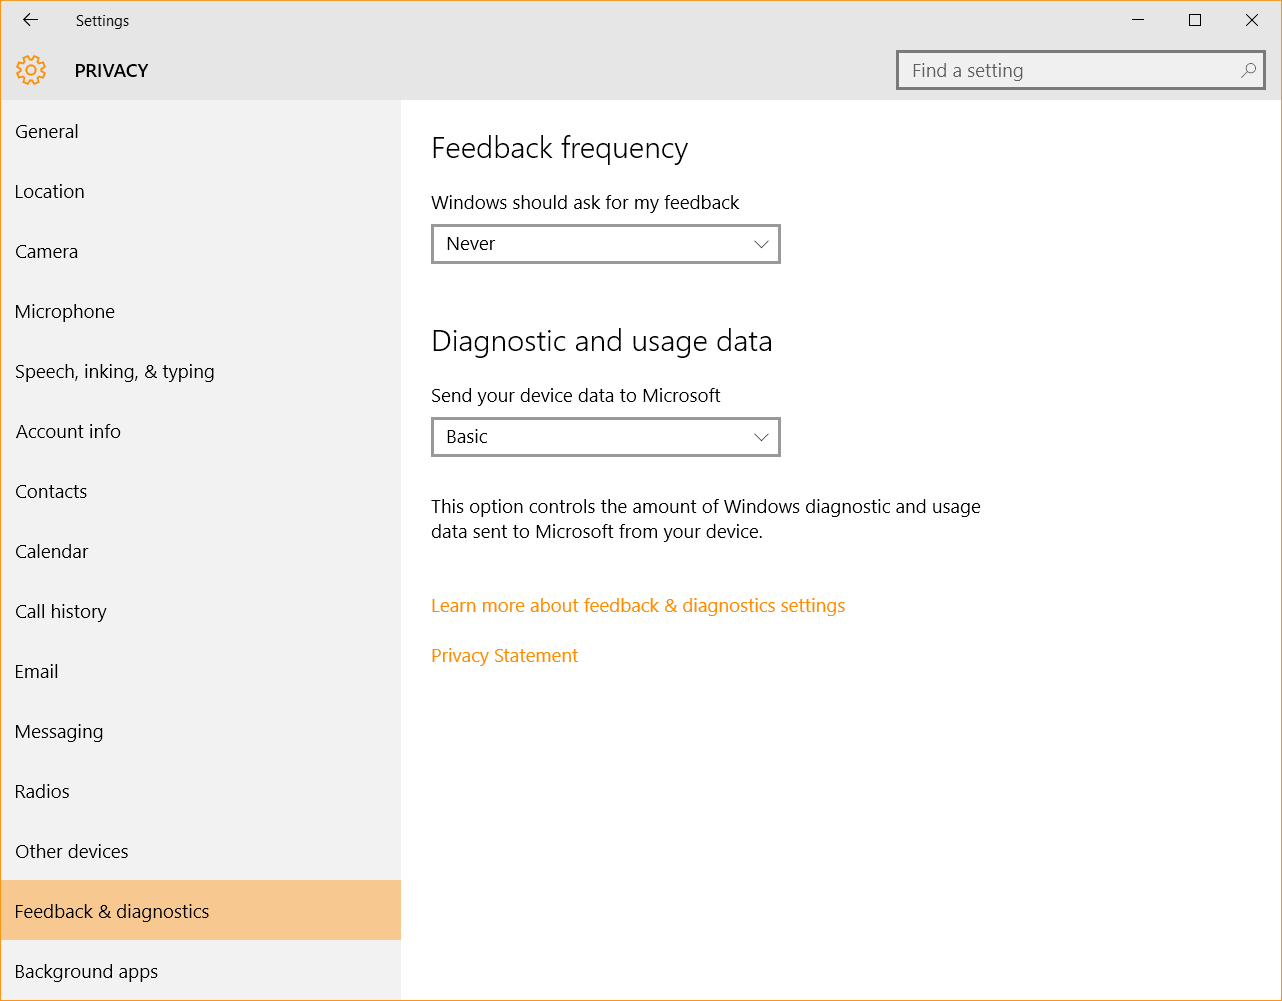 Windows 10 Security Guide - Feedback and Diagnostics Privacy Settings